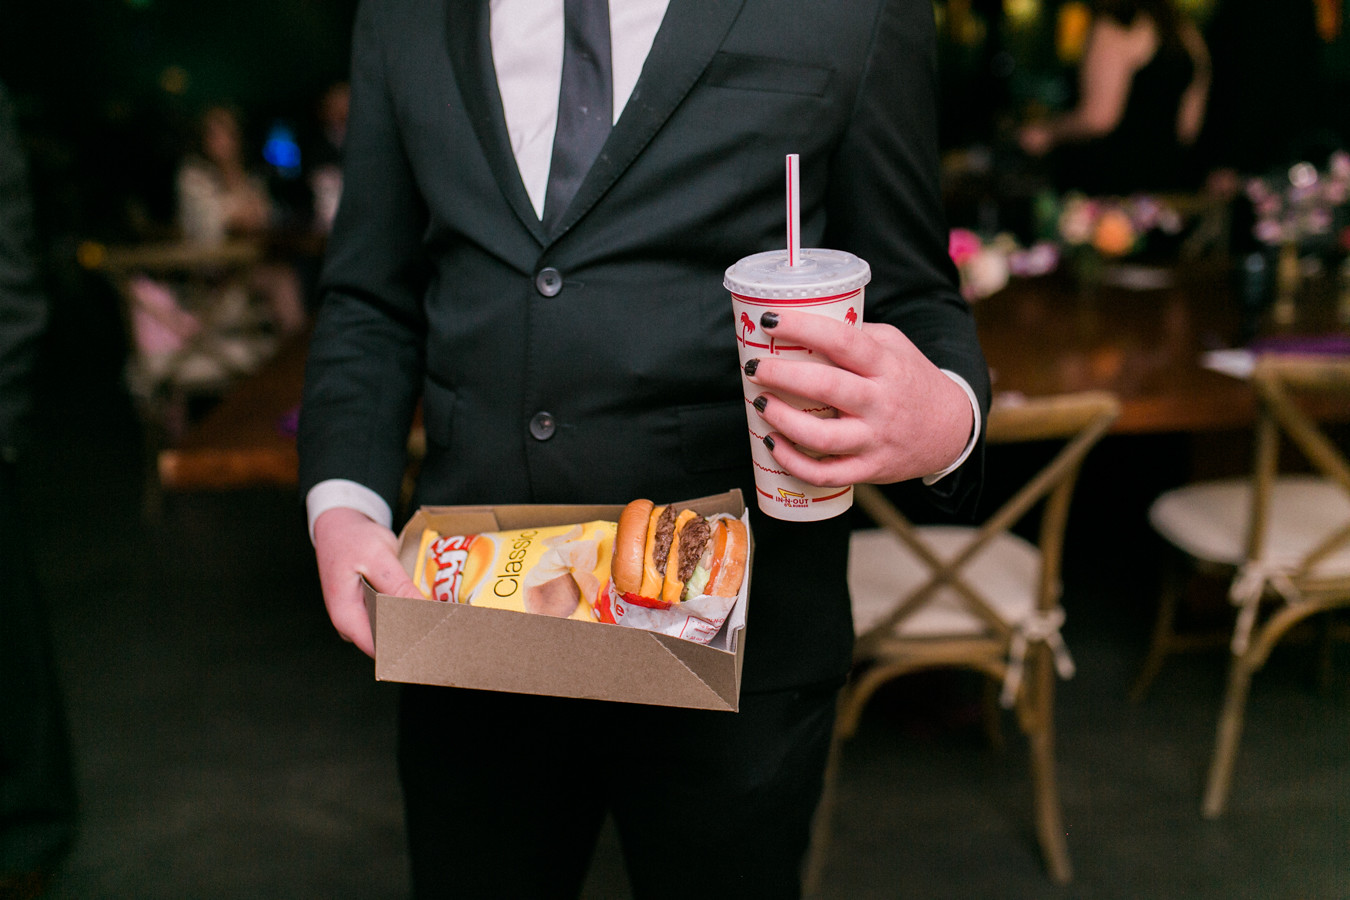 Person holding In-n-out burger meal in suit at wedding reception